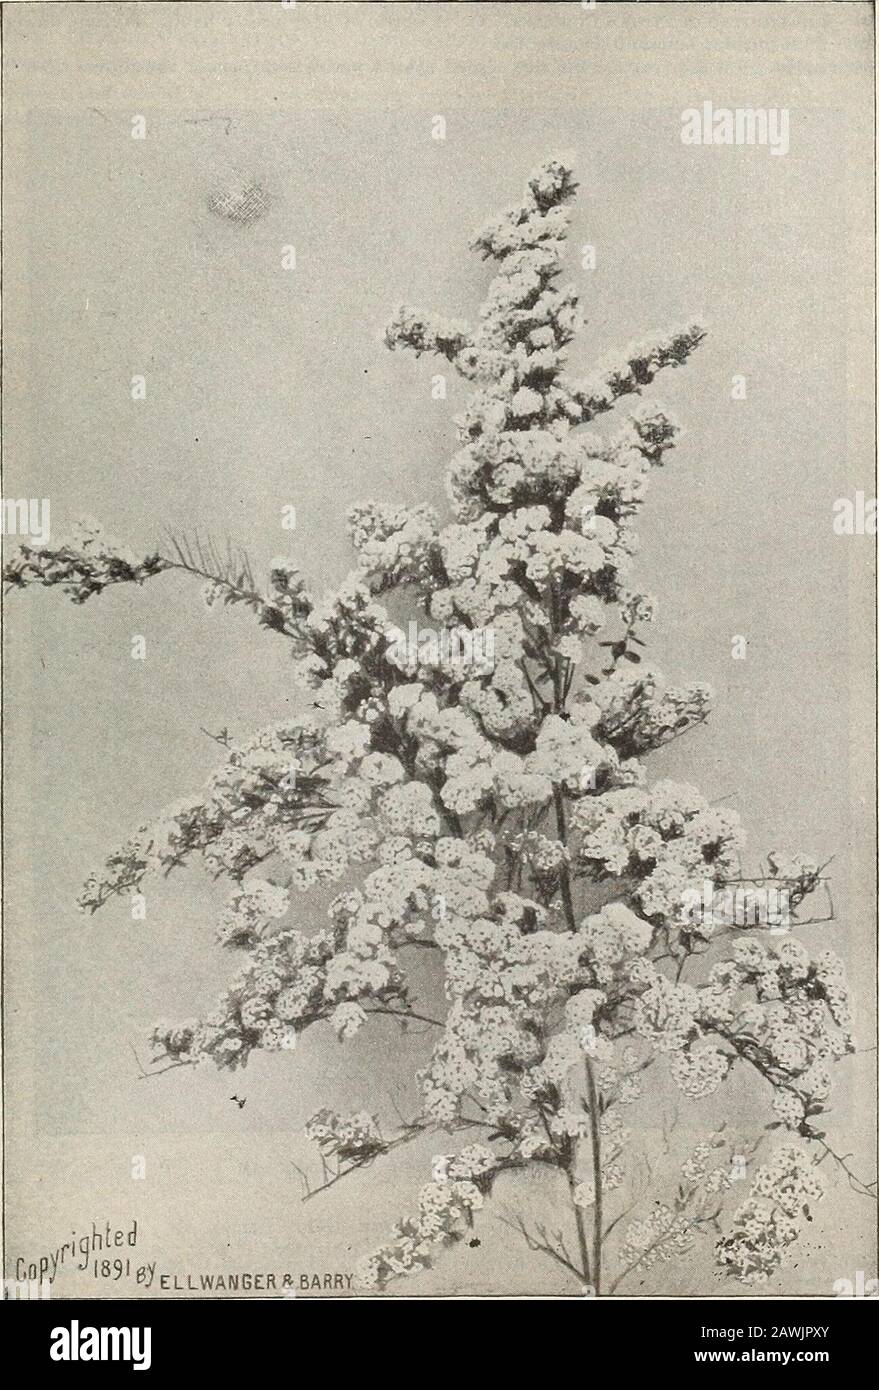 General catalogue of fruit and ornamental trees, shrubs, roses, etc . s. s. s. Spiraea Bumalda. (Reduced.)tenisslMia. D, A very early flowering variety GENERAL CATALOGUE. 95 Spiraea Thunbergii. TuuNBERGs SpiRjBA. D. Of divarf habit and rouuded, graceful form ; braaelies slenderand someA hilt drooping-; foliag-e narrow and yellowish green; flowers small, white, appearing early inspring, being one of the firet Spiraeas to flower. Esteemed on account of its neat, graceful habit. Forceswell in winter. 35c. S. trilobata. Thbee-l,Obed PPIRJEA. D. A vigorous grower. Three-lobed leaves; white flowers. Stock Photo